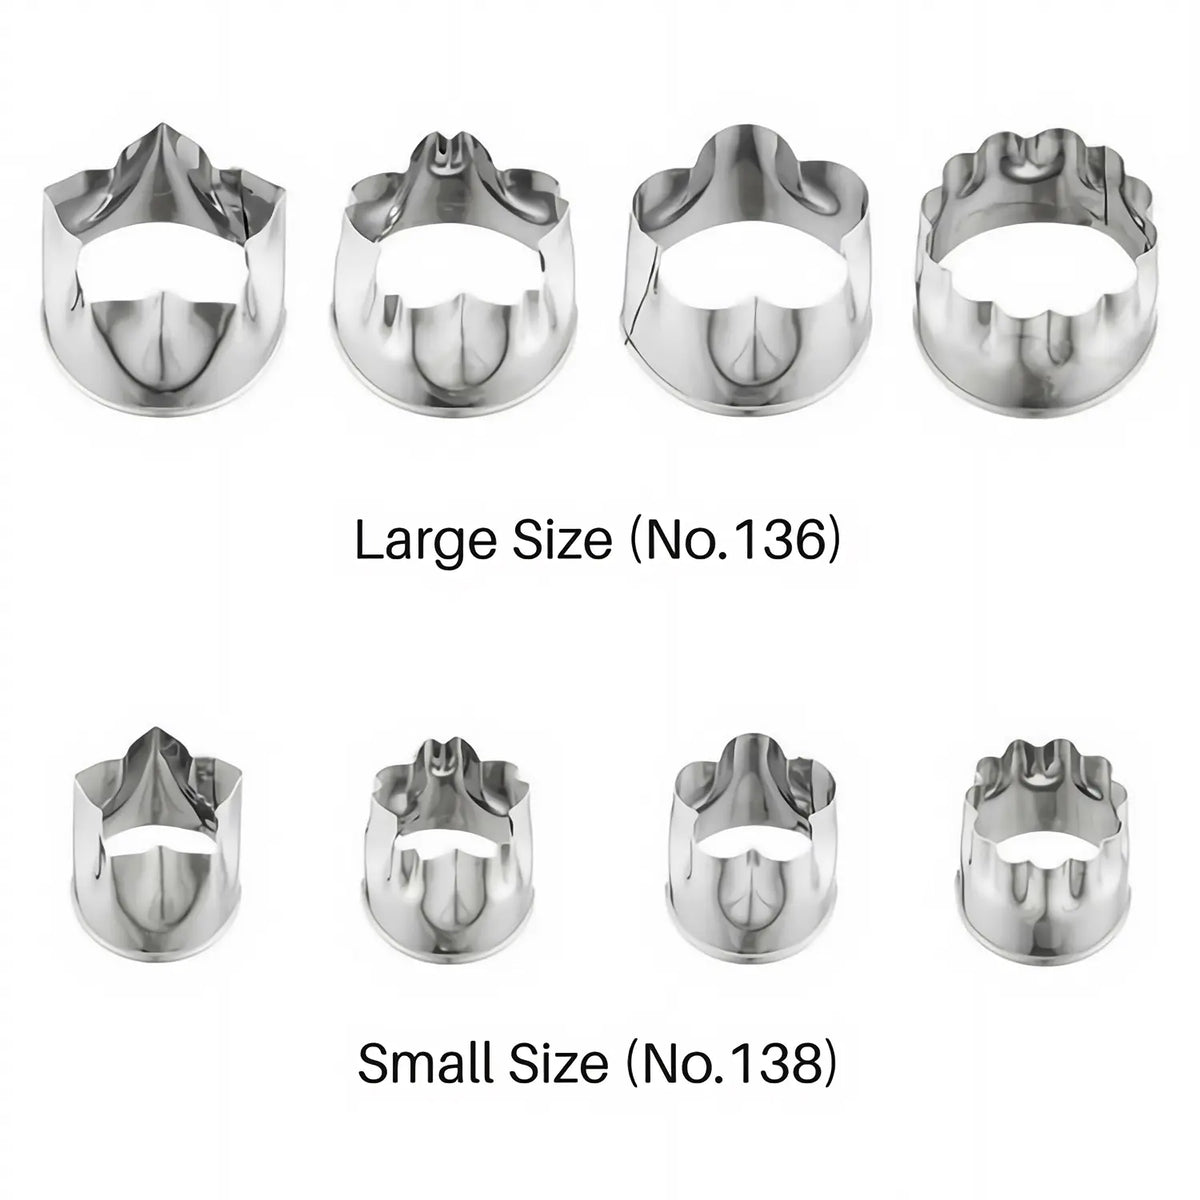 SHIMOTORI Stainless Steel Cookie Cutter 4 pcs